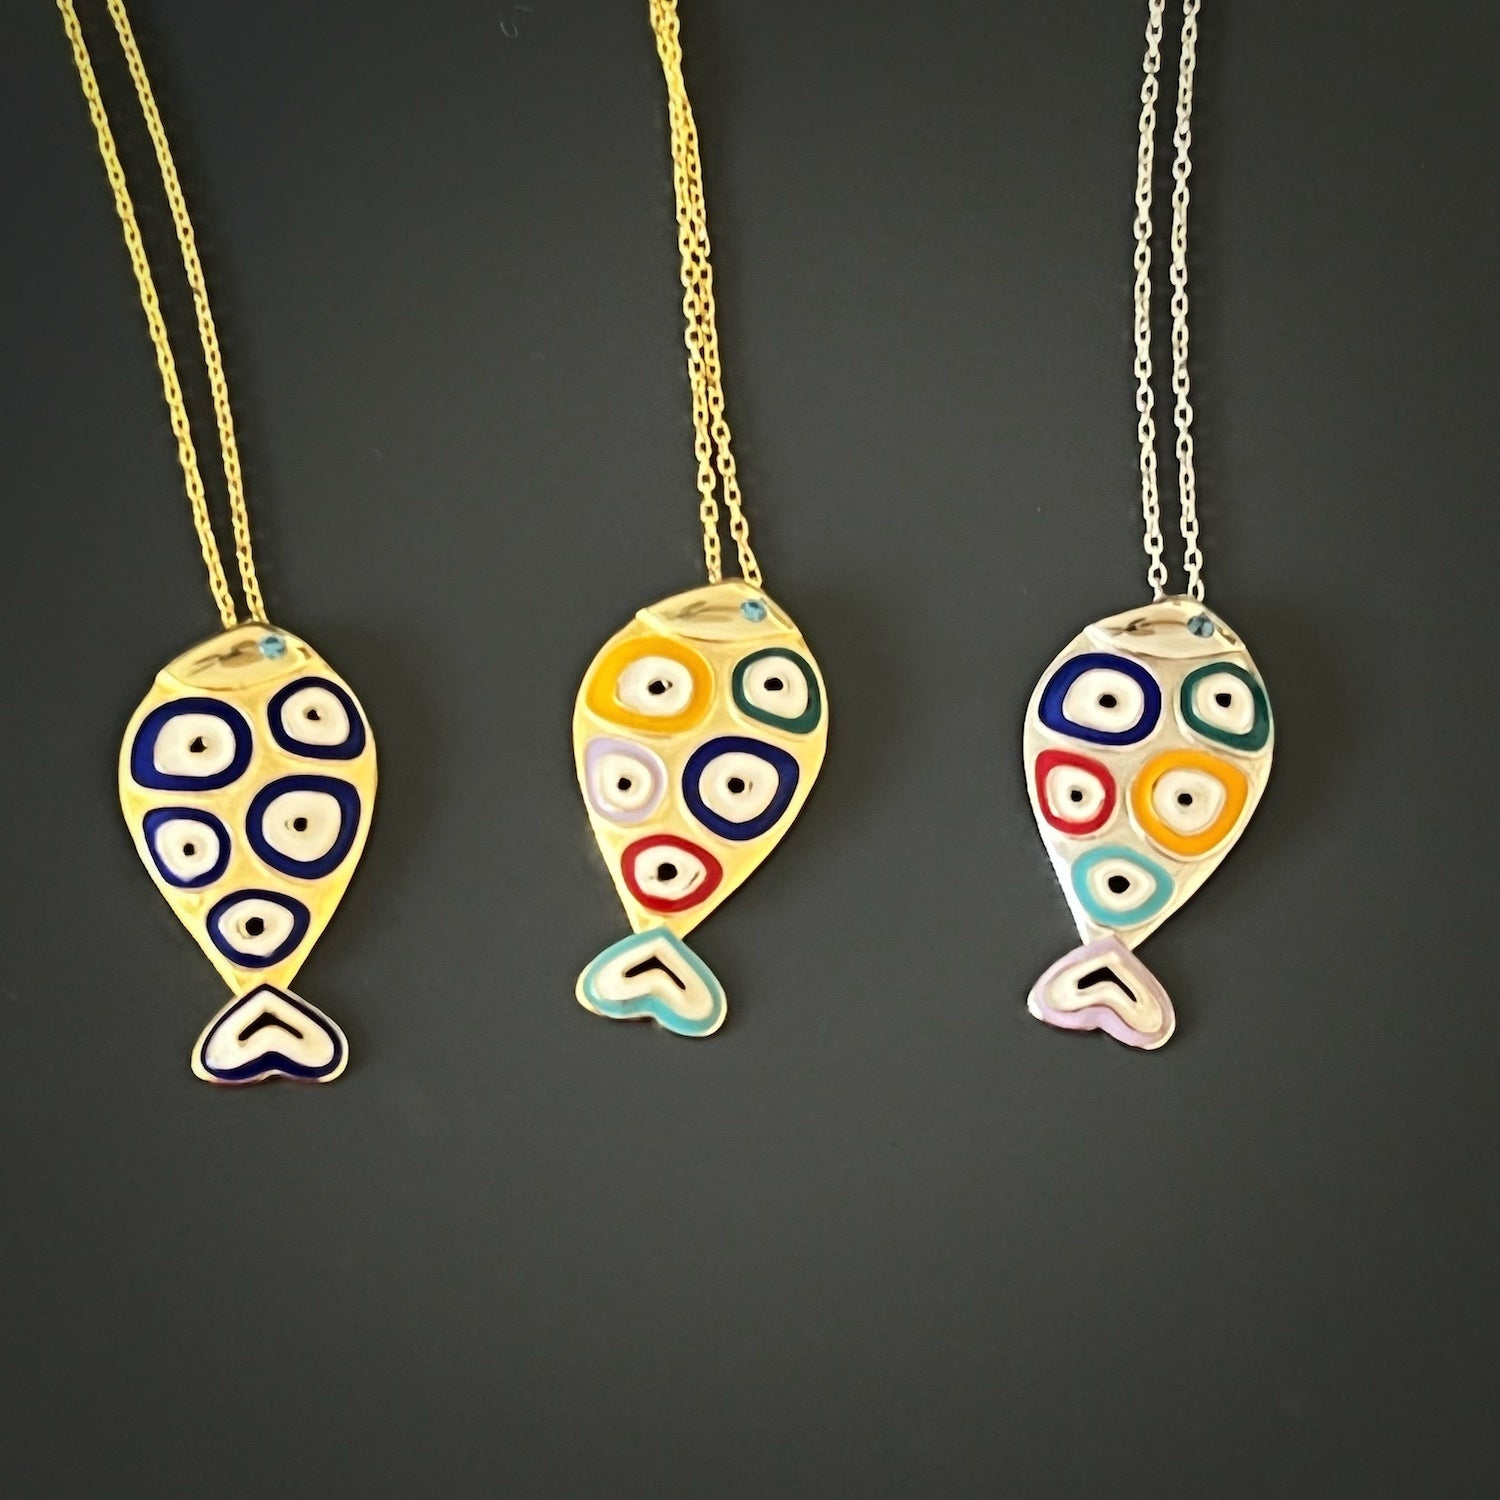 The Silver Evil Eye Fish Necklace, a versatile and meaningful jewelry piece that can be worn with various outfits and styles.